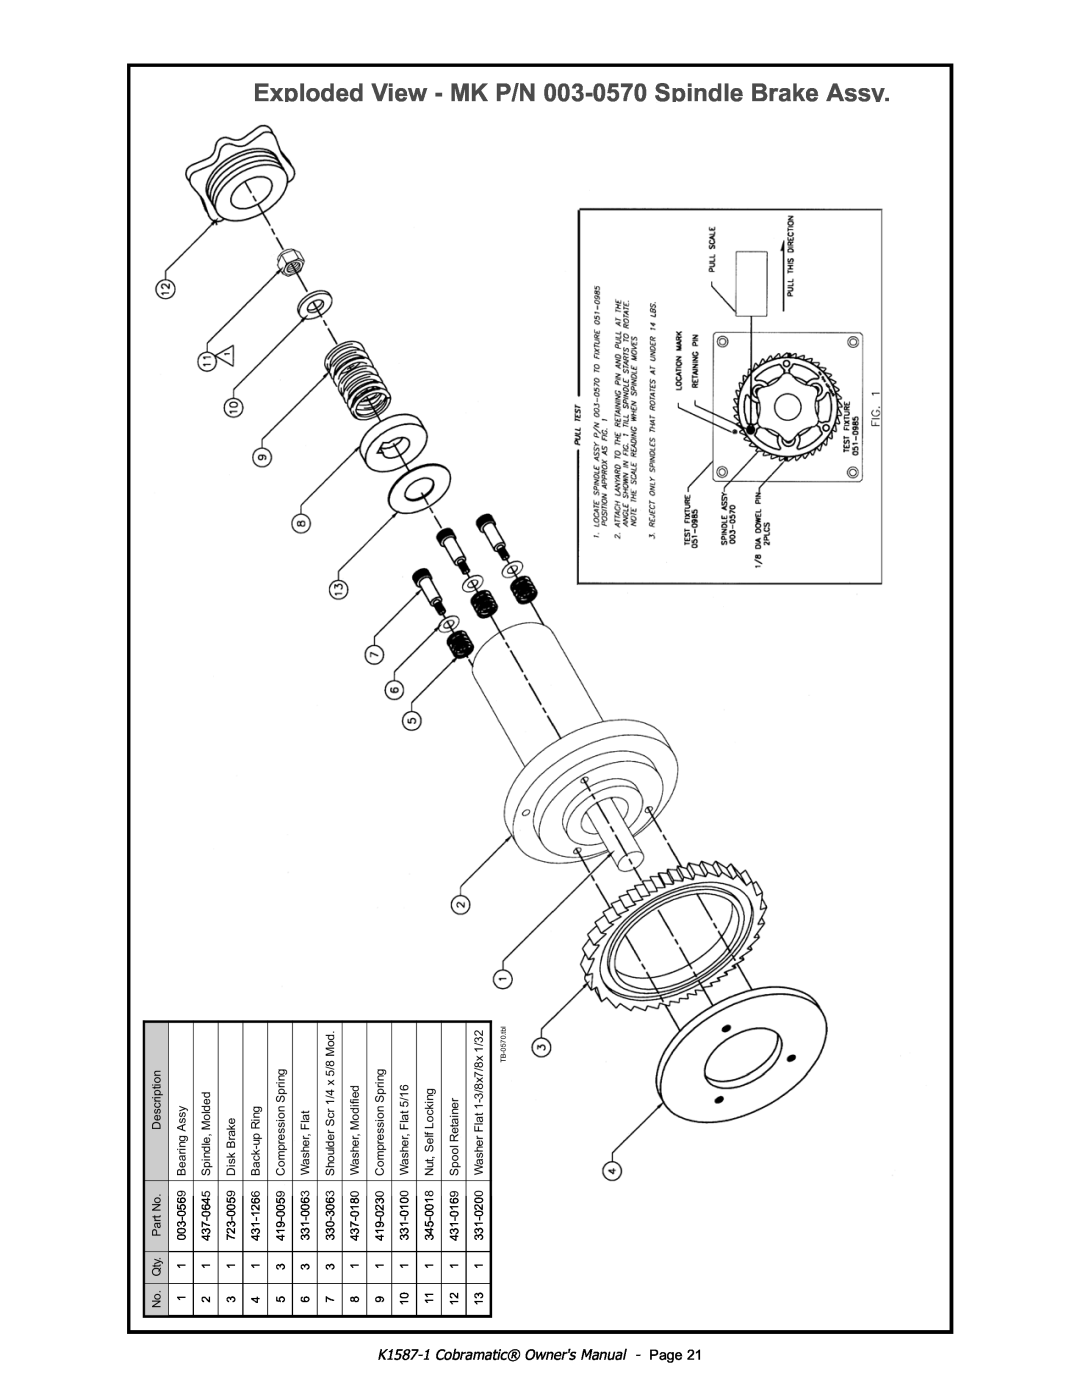 Lincoln Electric IM597 manual Exploded View - MK P/N 003-0570 Spindle Brake Assy, K1587-1 Cobramatic Owners Manual - Page 